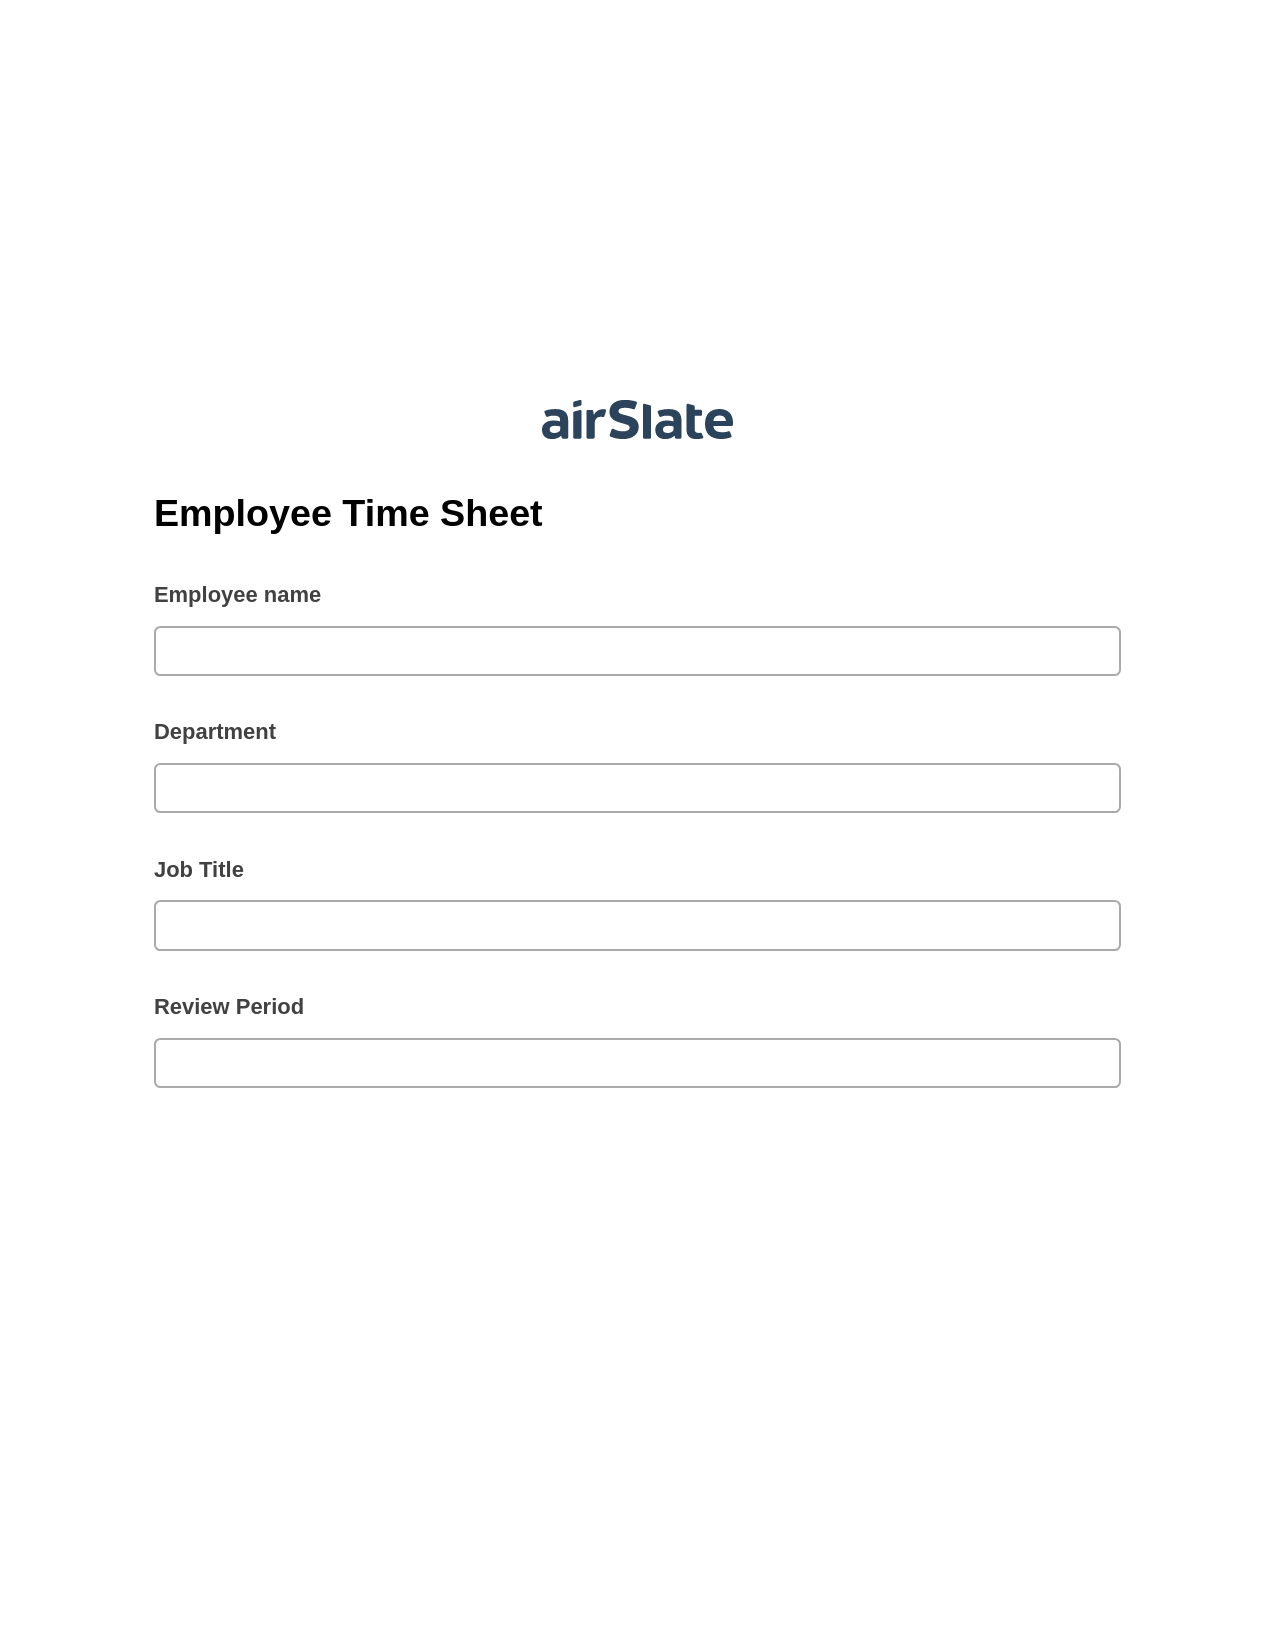 Employee Time Sheet Pre-fill Dropdowns from Airtable, Update Audit Trail Bot, Export to Smartsheet